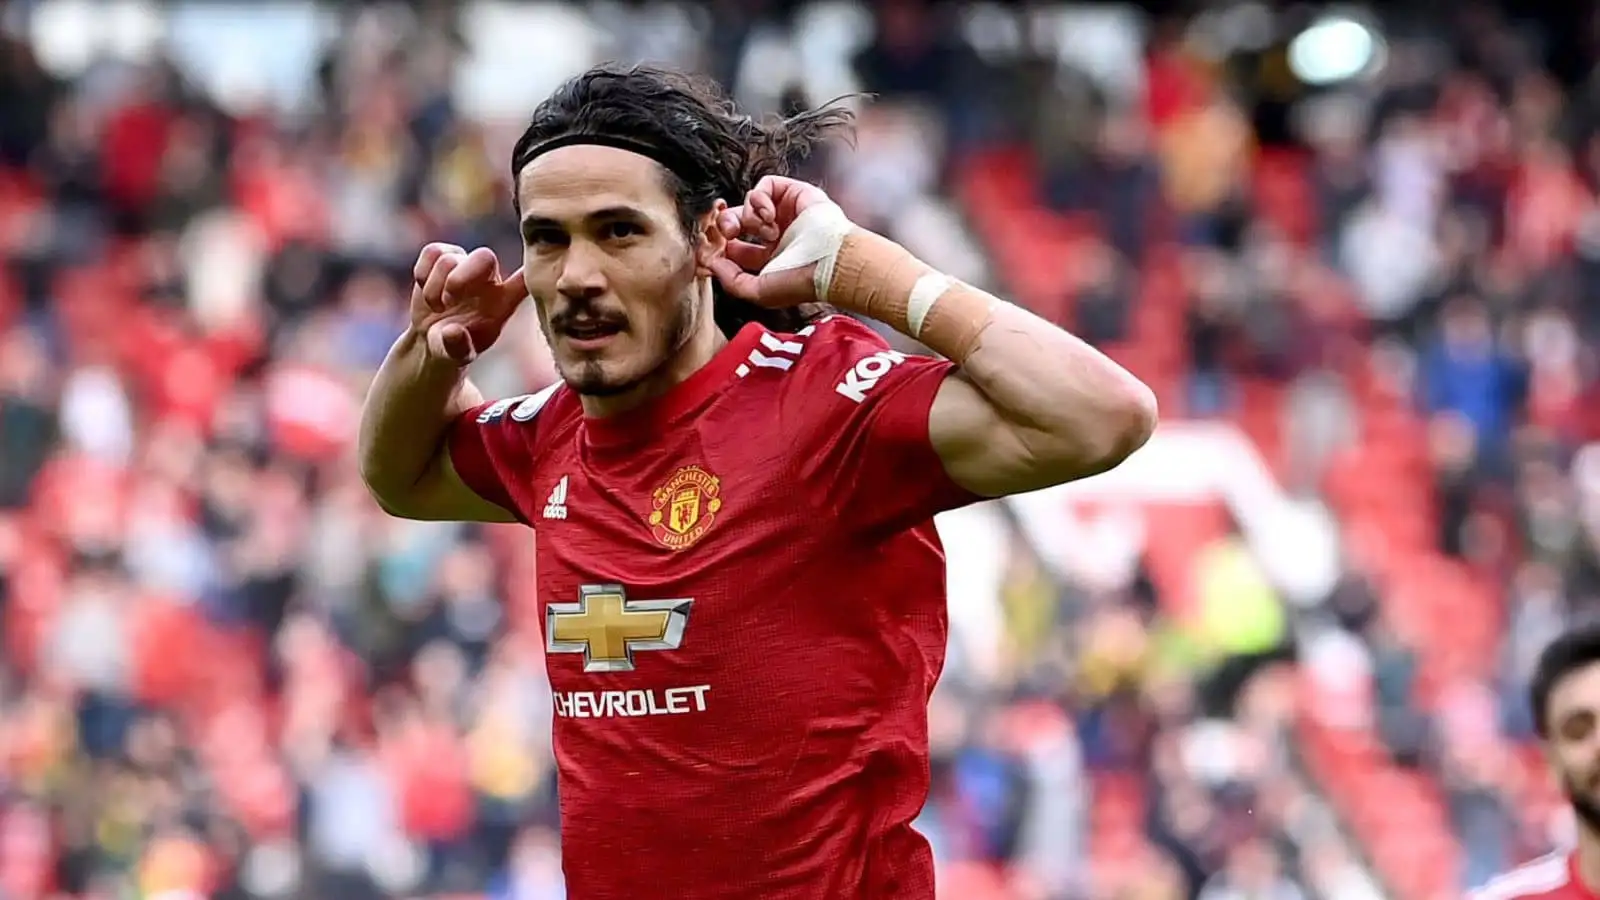 Manchester United's Edinson Cavani celebrates scoring their side's first goal of the game during the Premier League match at Old Trafford, Manchester